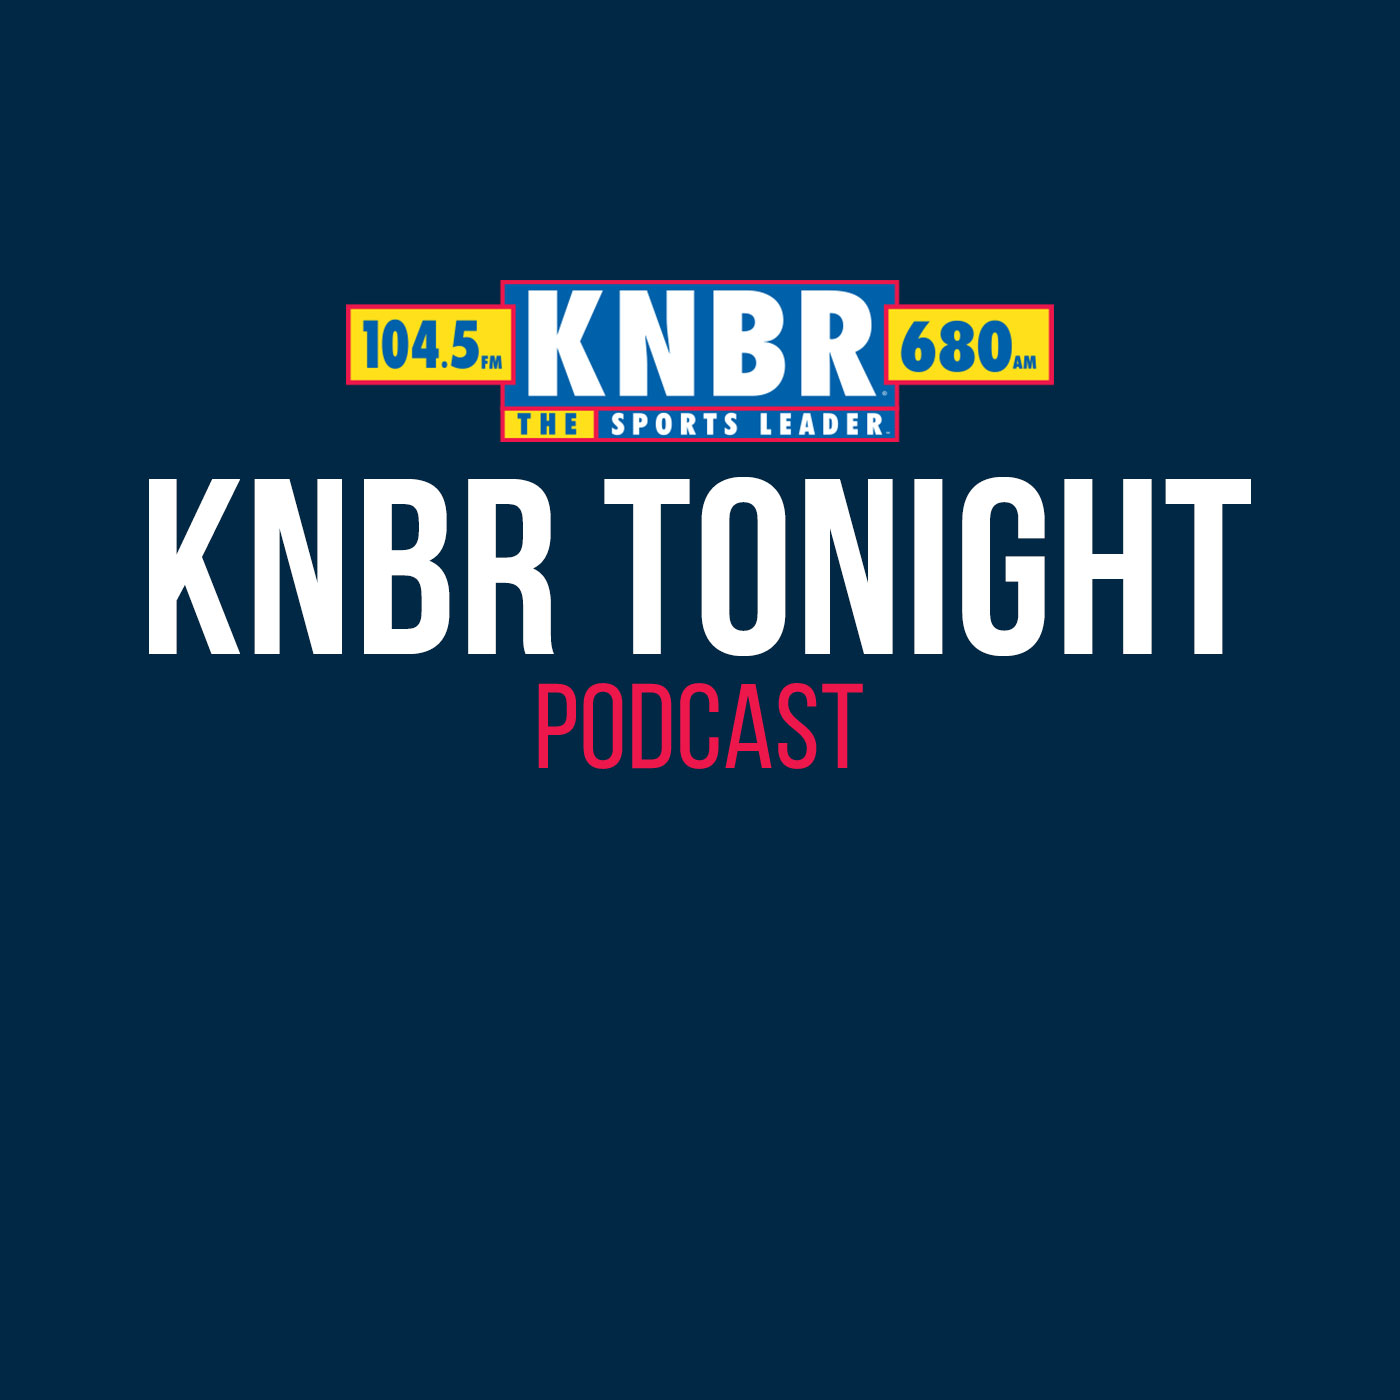 10-6 Mike Yaz joins KNBR Tonight with Dieter to talk about this magical season and game 1 of the NLDS